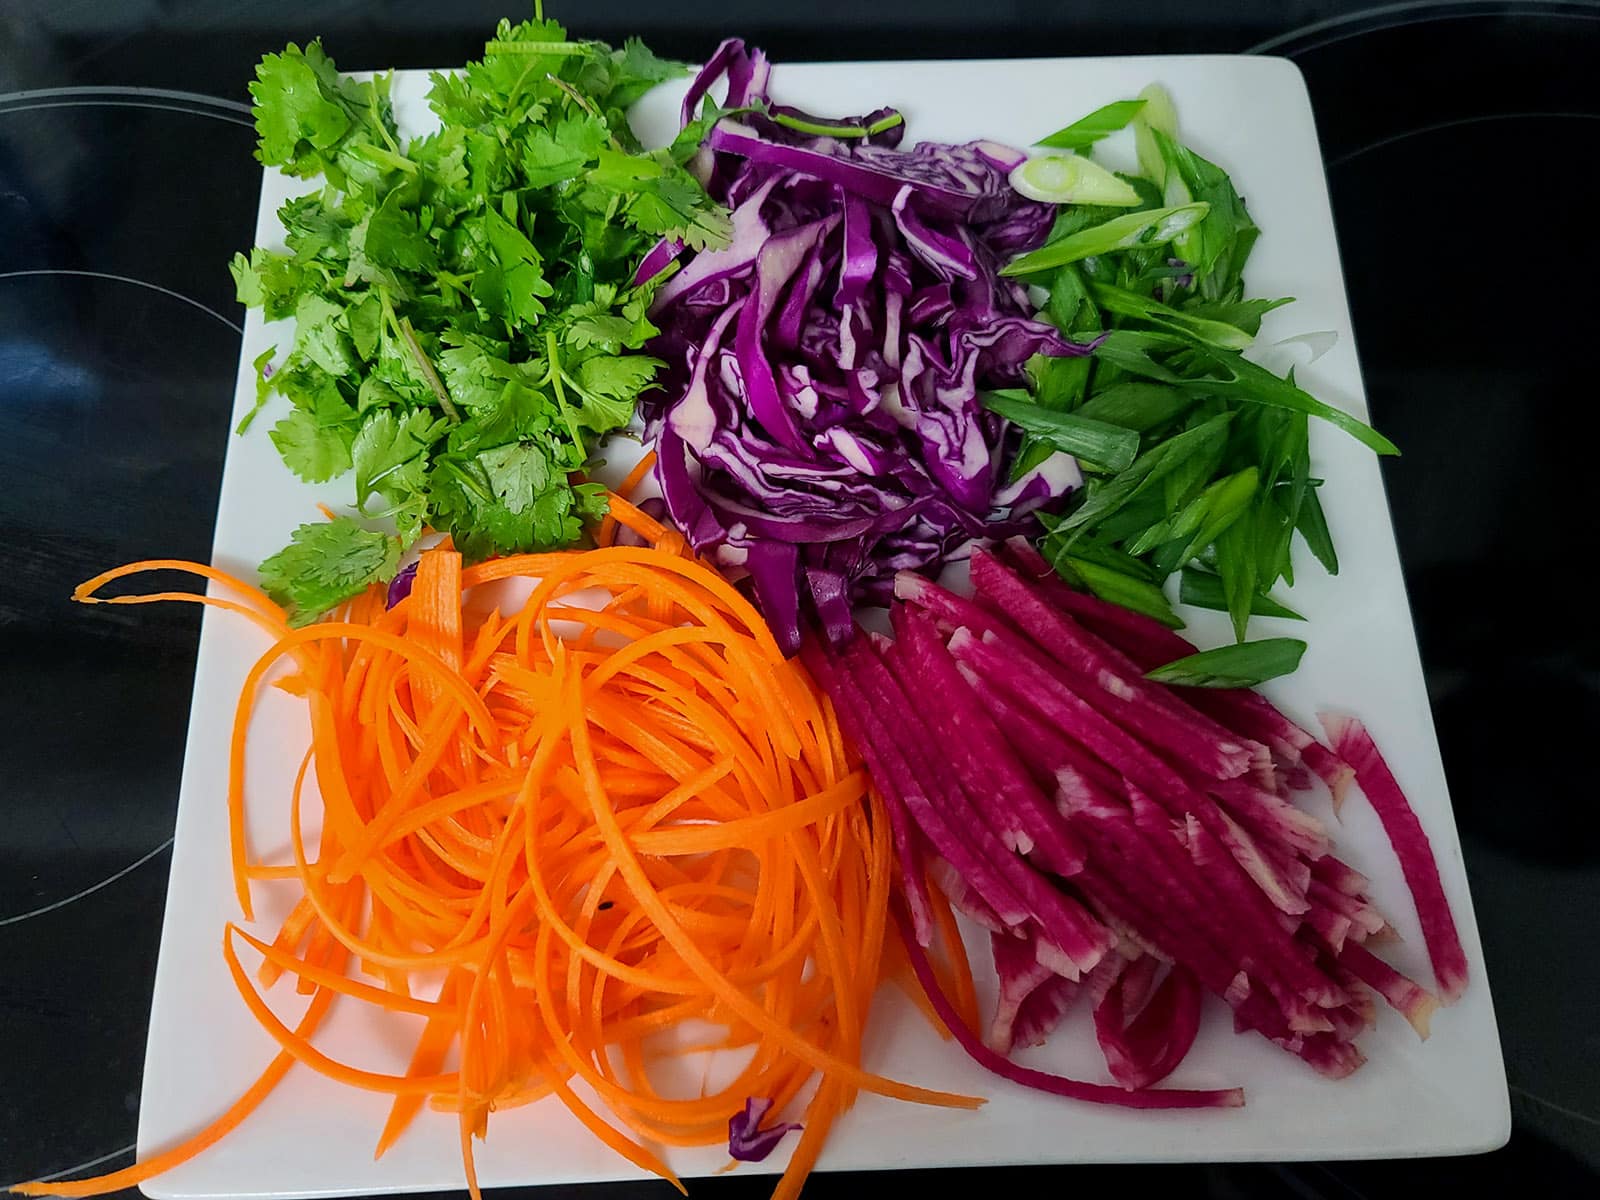 A plate of watermelon radish slices, julienned carrots, sliced purple cabbage, green onions, and cilantro.